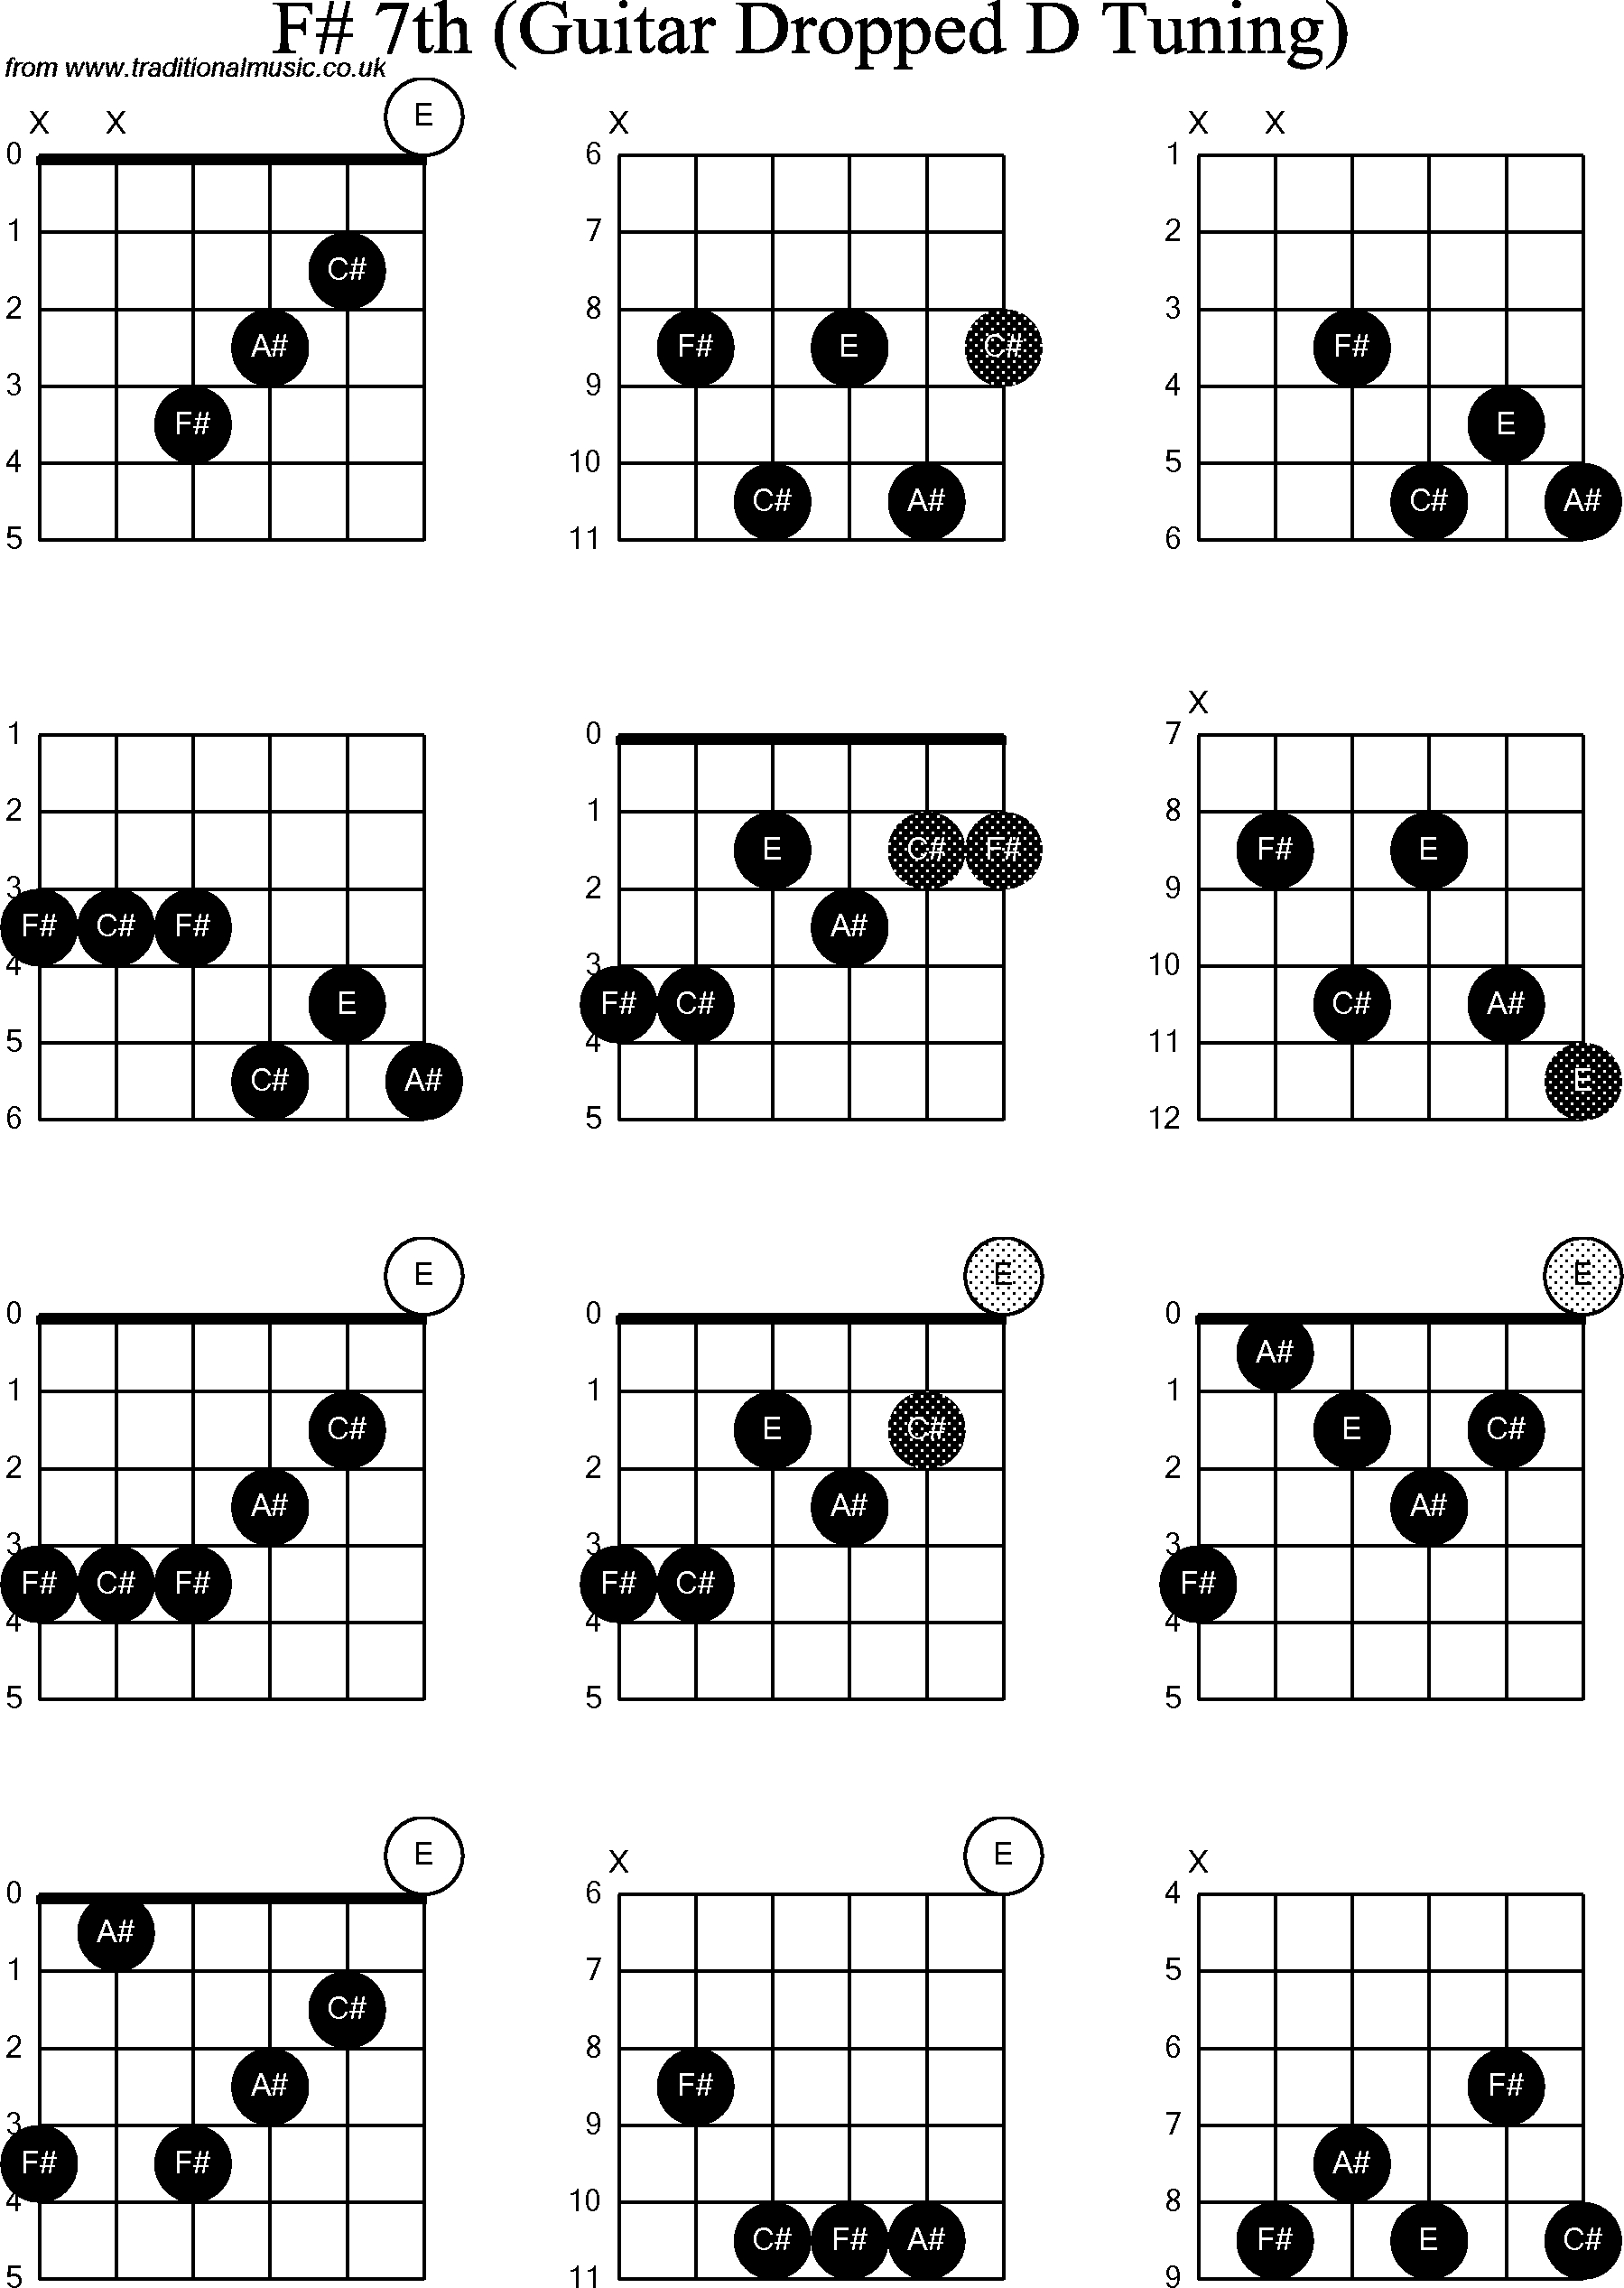 F Chord On Guitar Chord Diagrams For Dropped D Guitardadgbe F Sharp7th